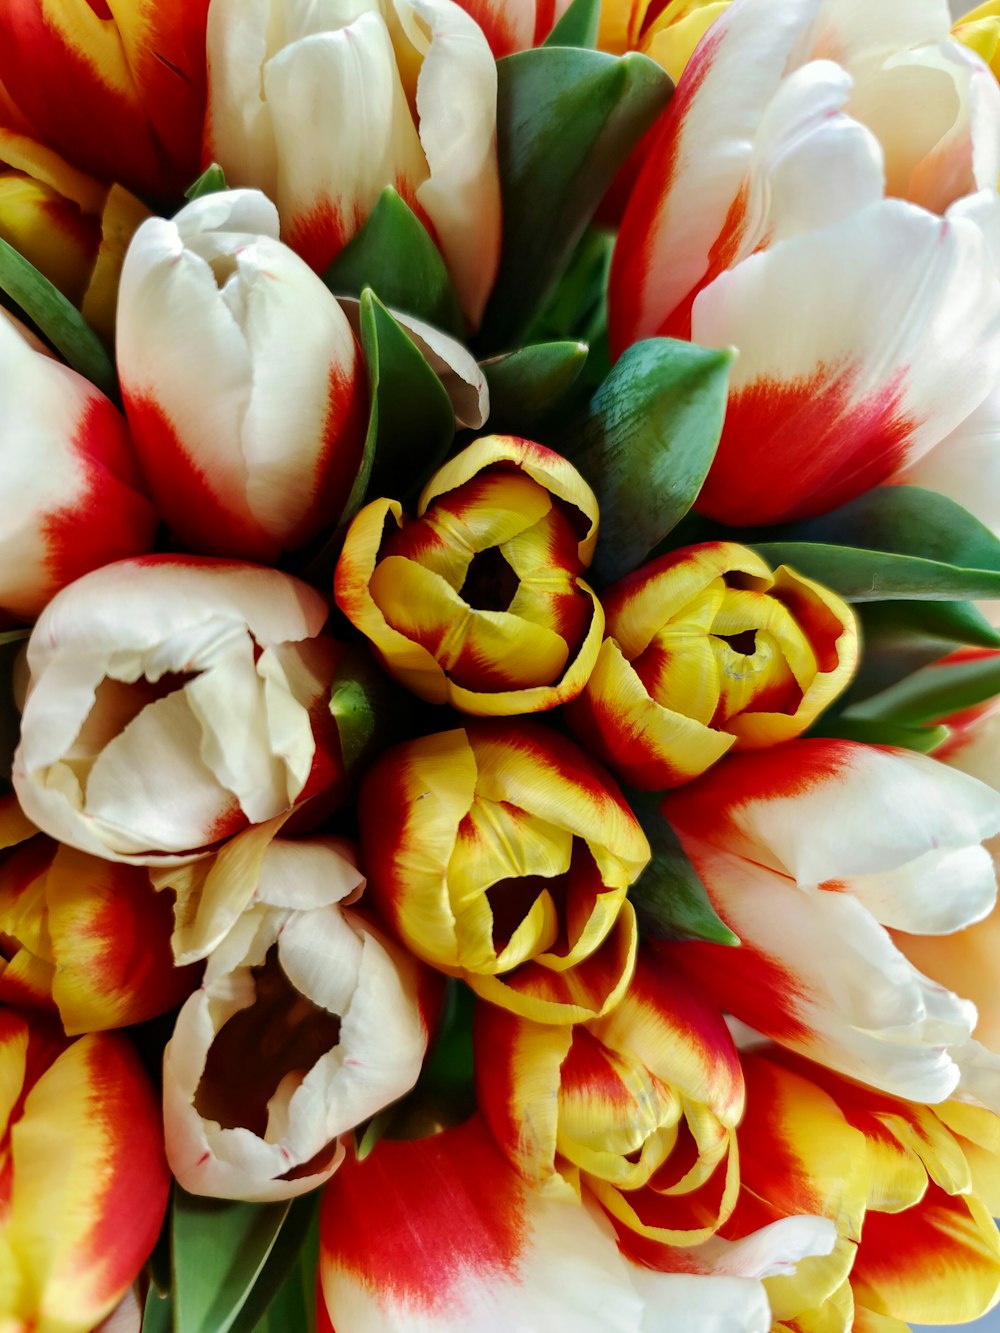 a bouquet of red and yellow tulips with green leaves